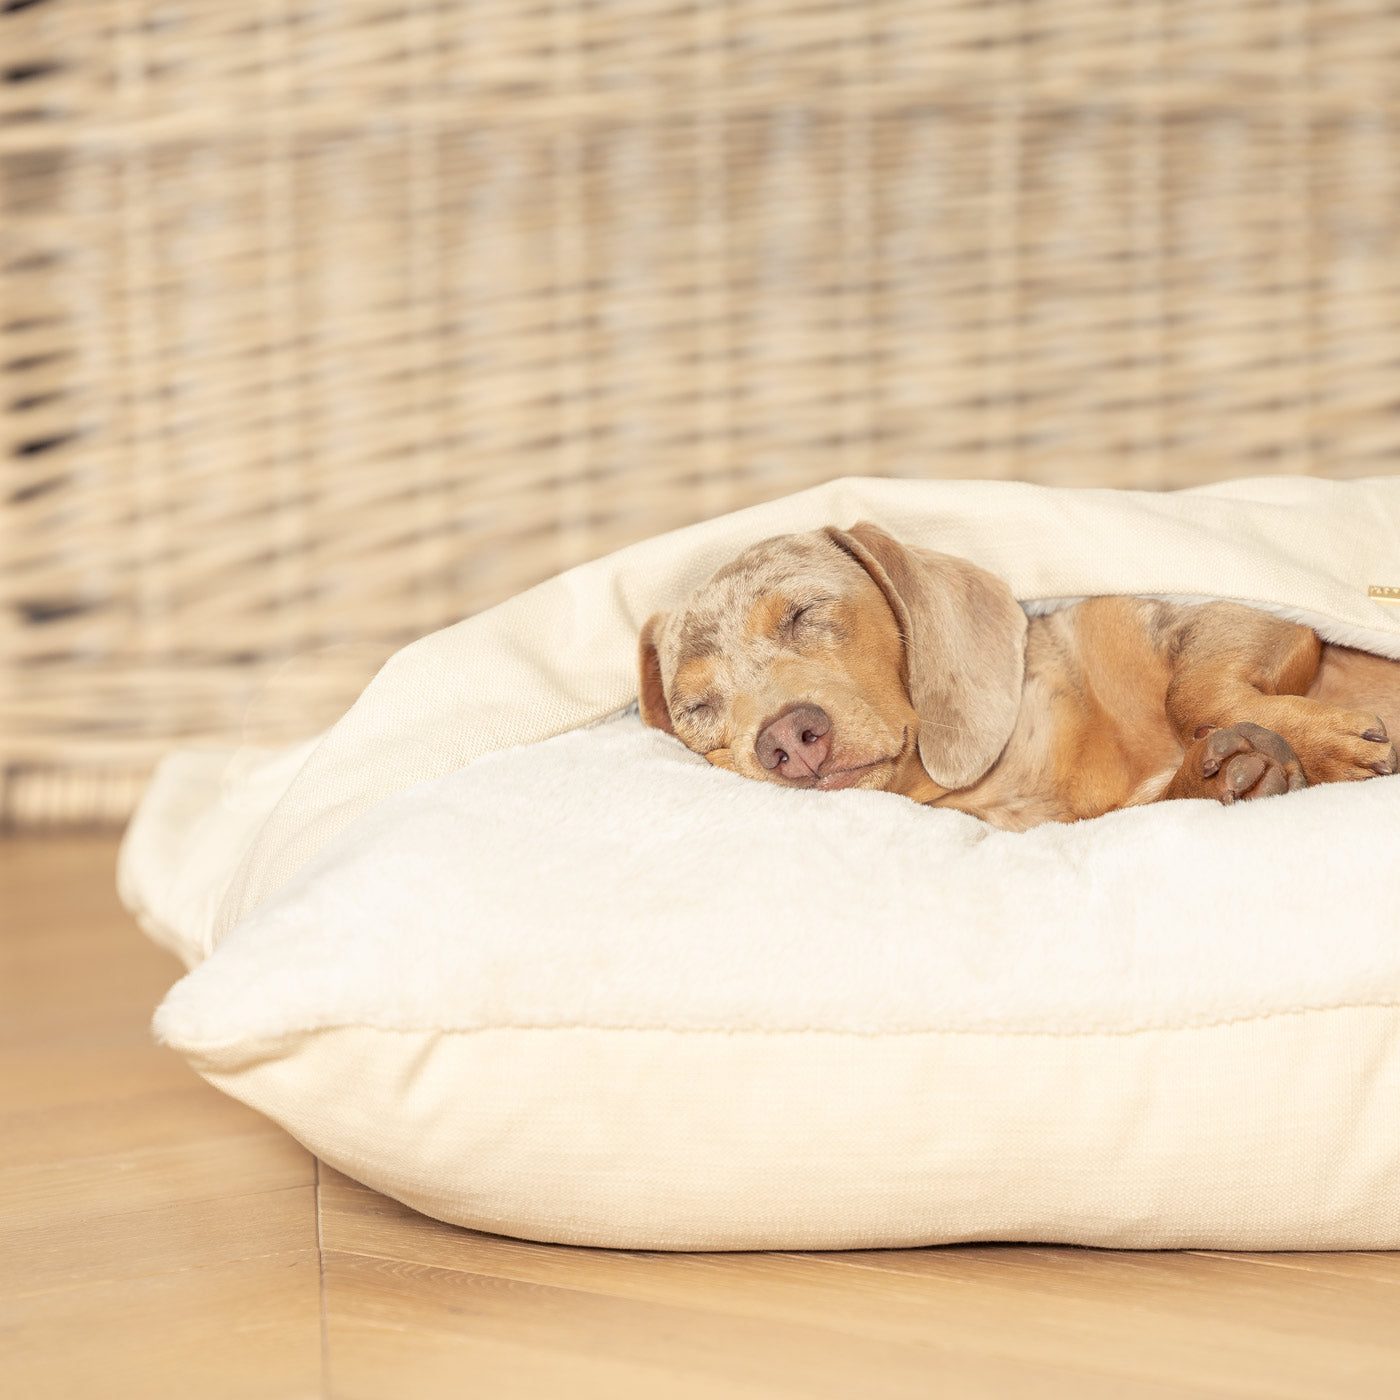 Discover The Perfect Burrow For Your Pet, Our Stunning Sleepy Burrow Dog Beds In Savanna Bone Is The Perfect Bed Choice For Your Pet, Available Now at Lords & Labradors US